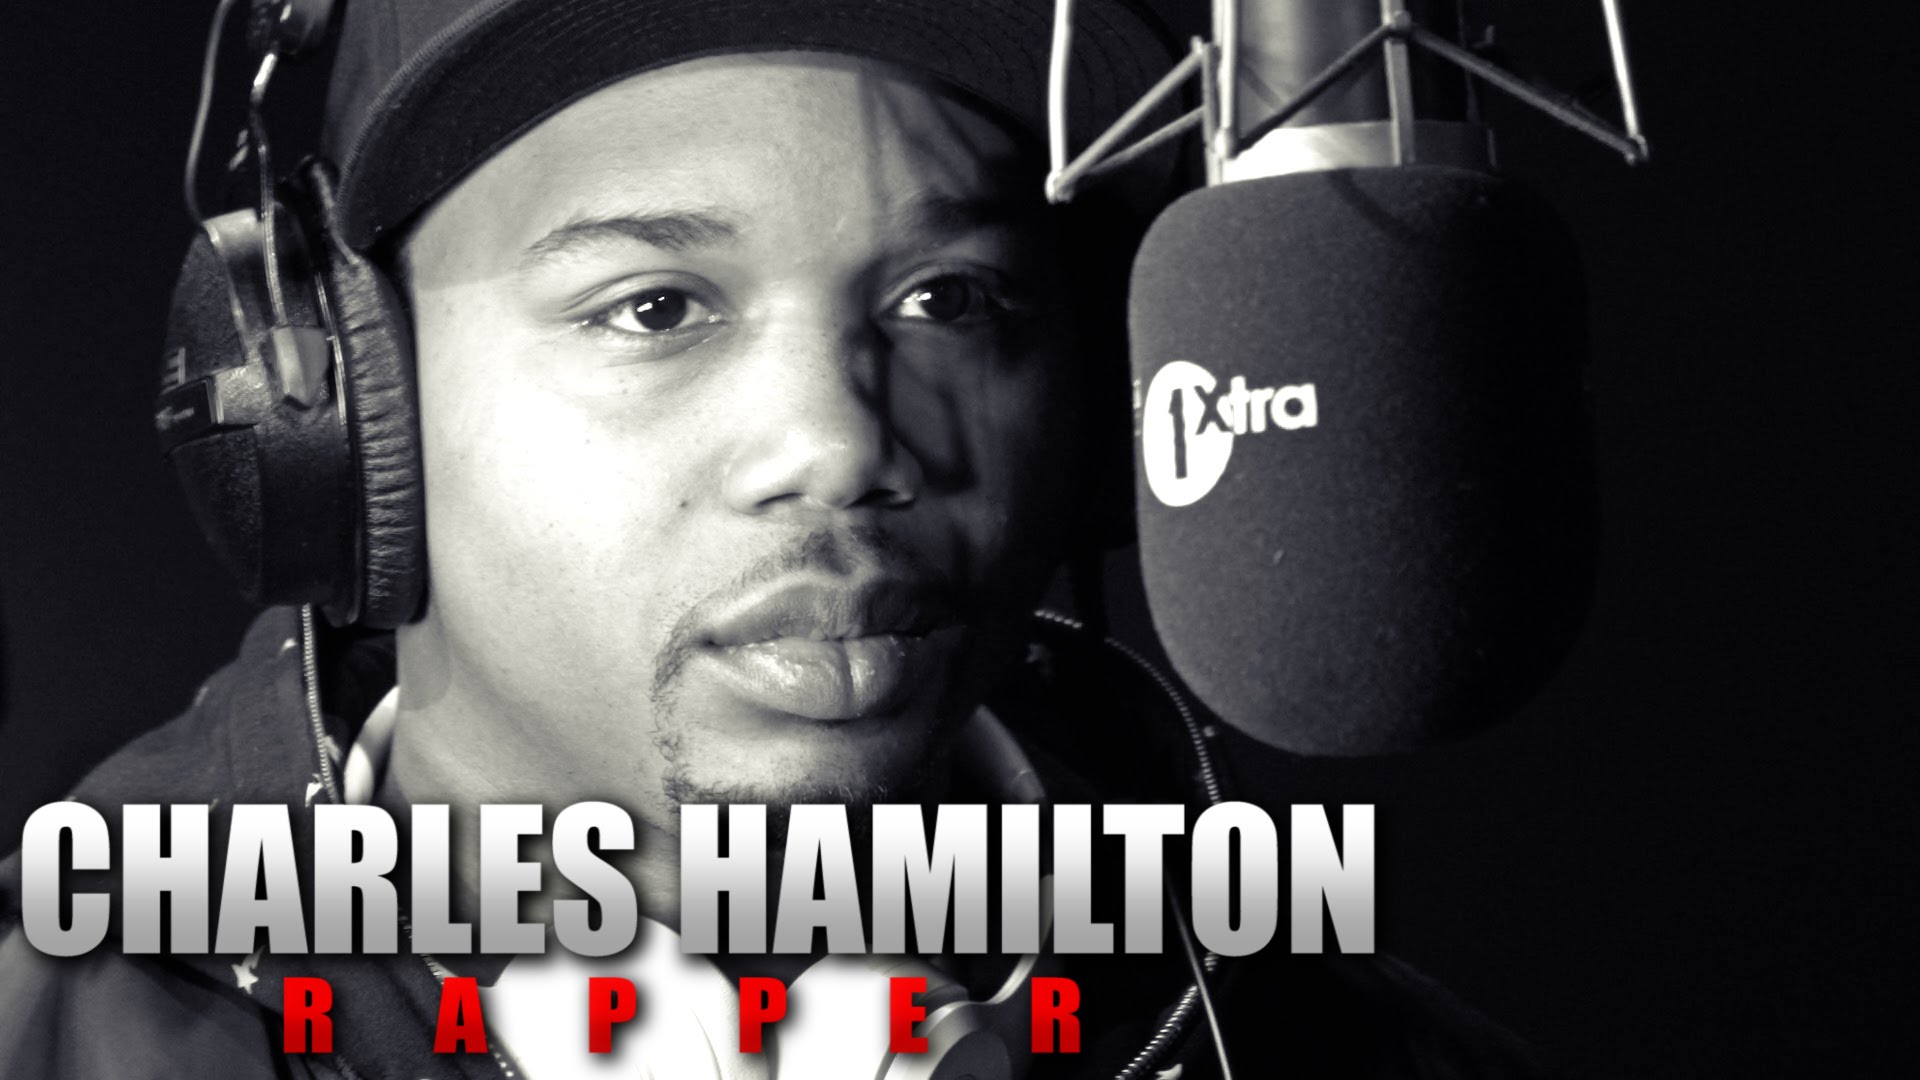 Charles Hamilton. Fire in the Booth Type Beat.